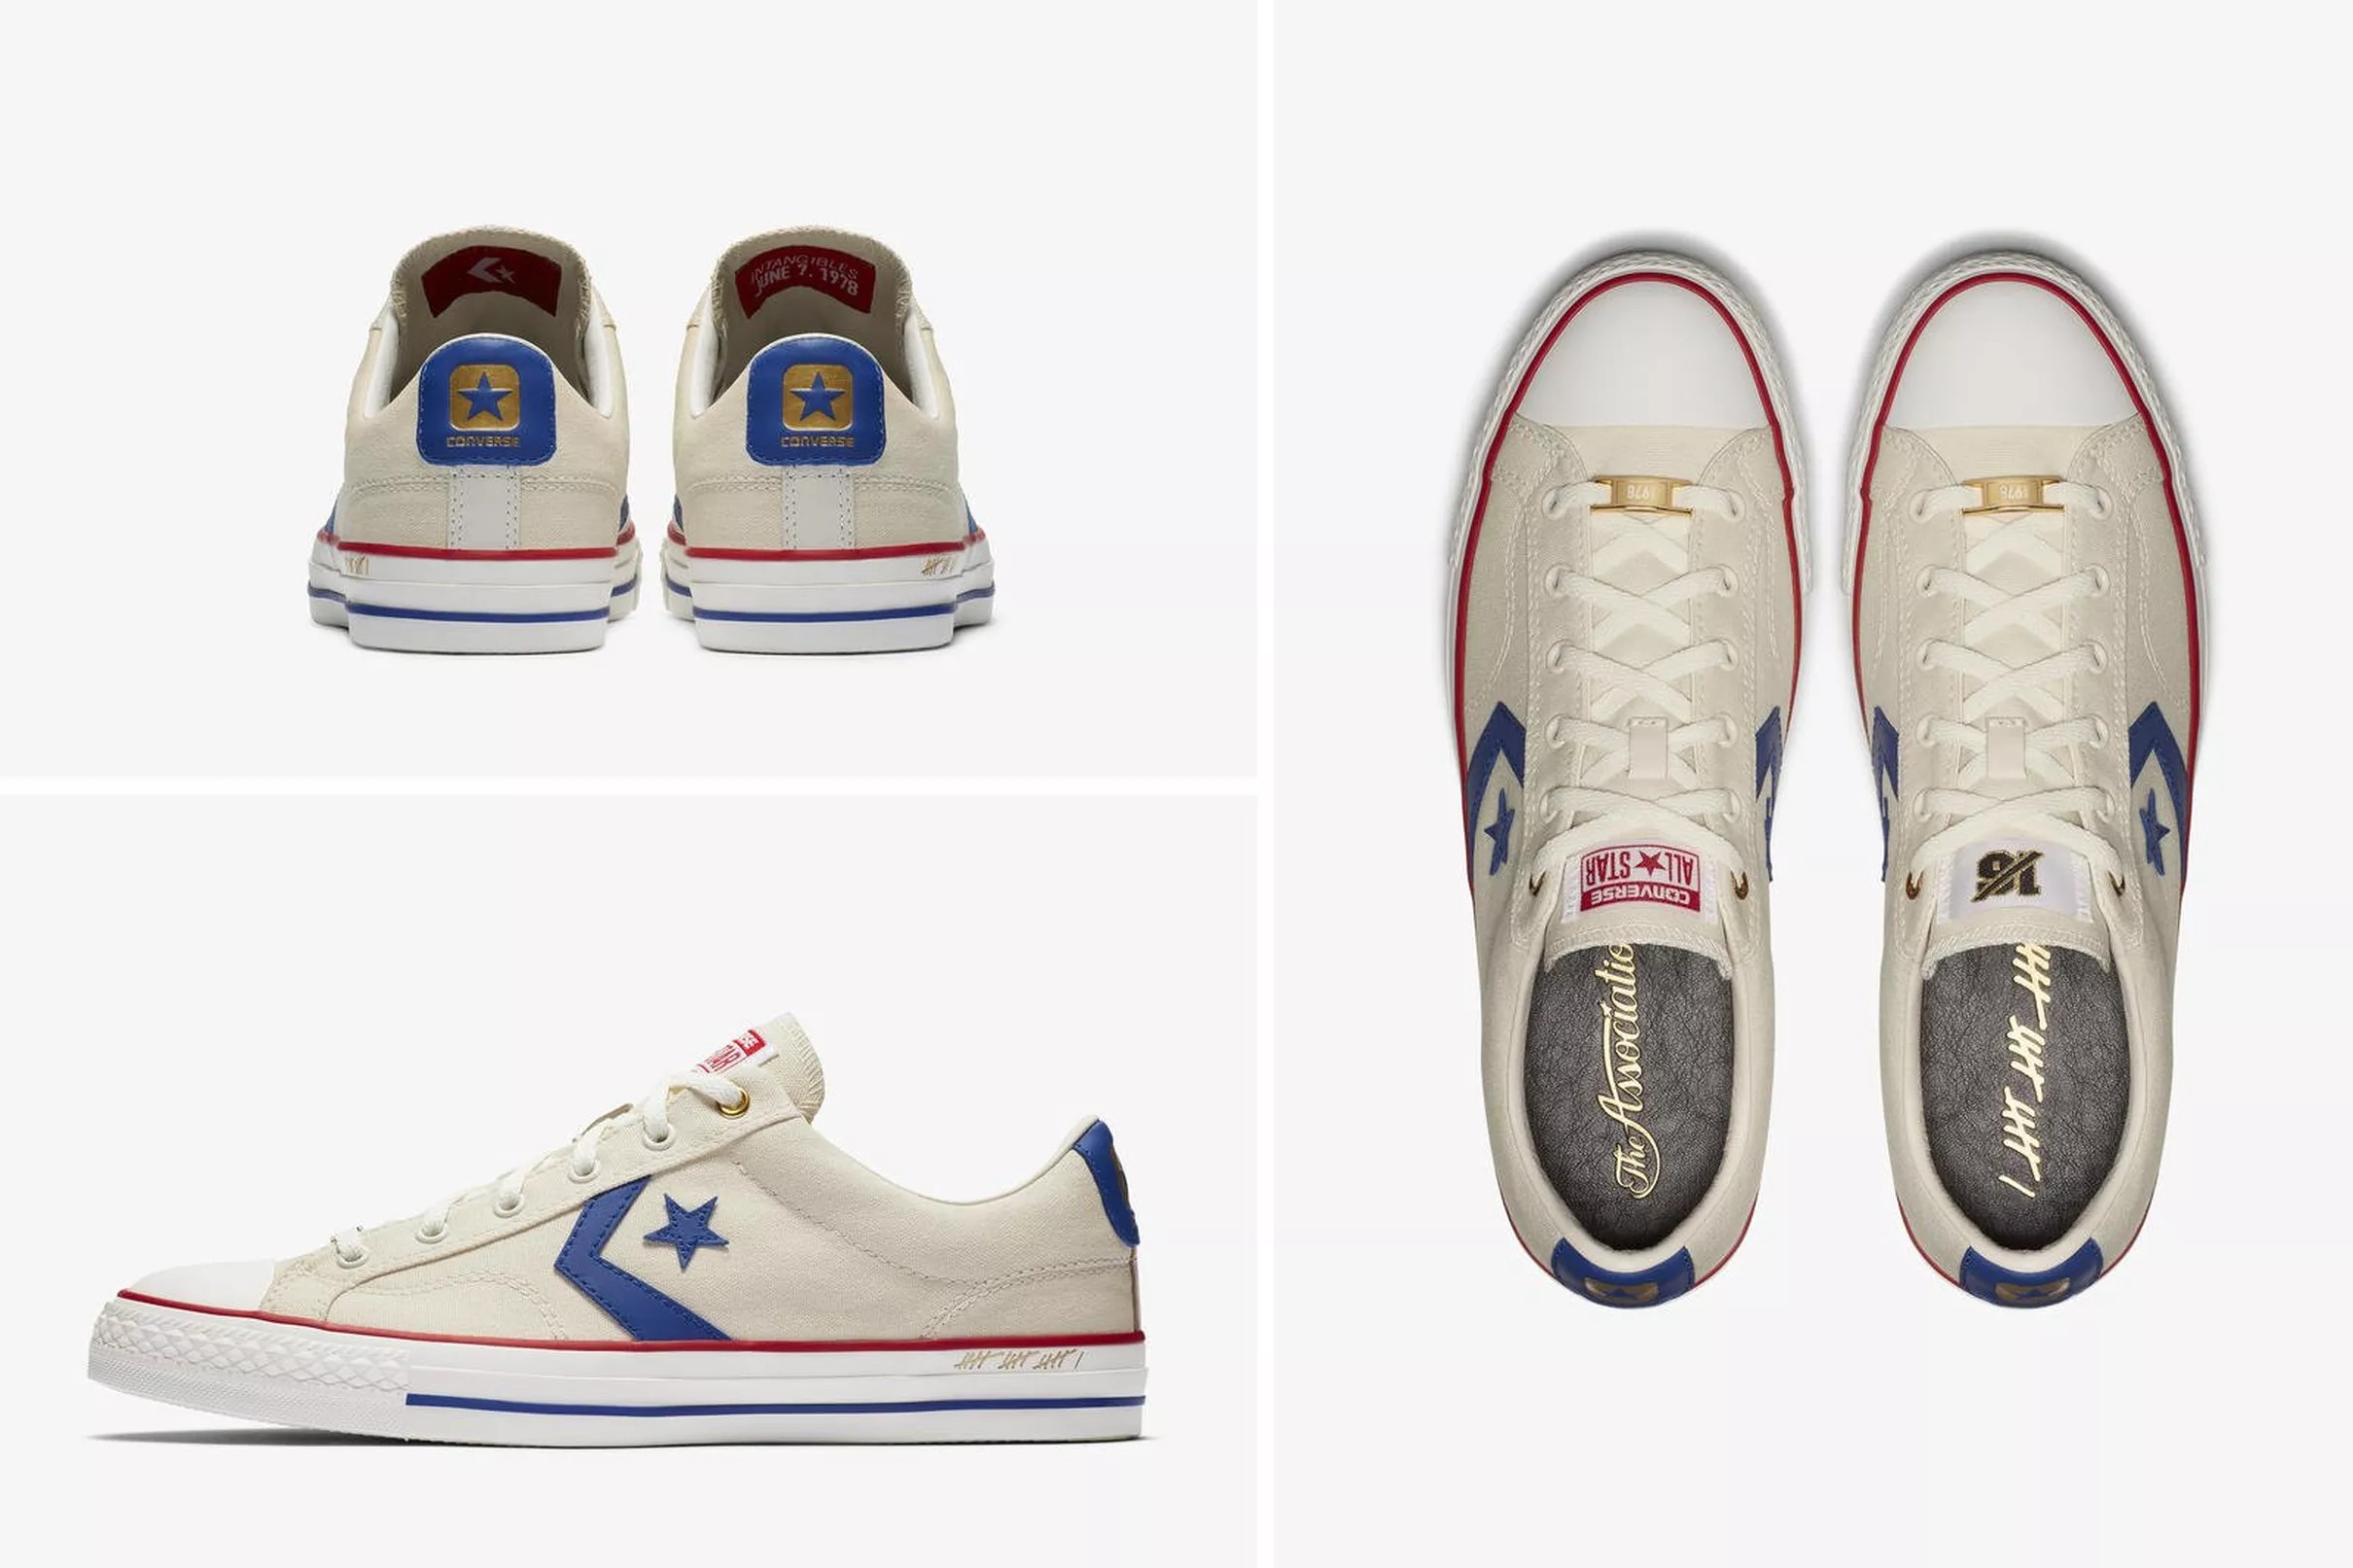 Nike and Converse honoring Wes Unseld's 1978 NBA Finals performance with  retro shoe release